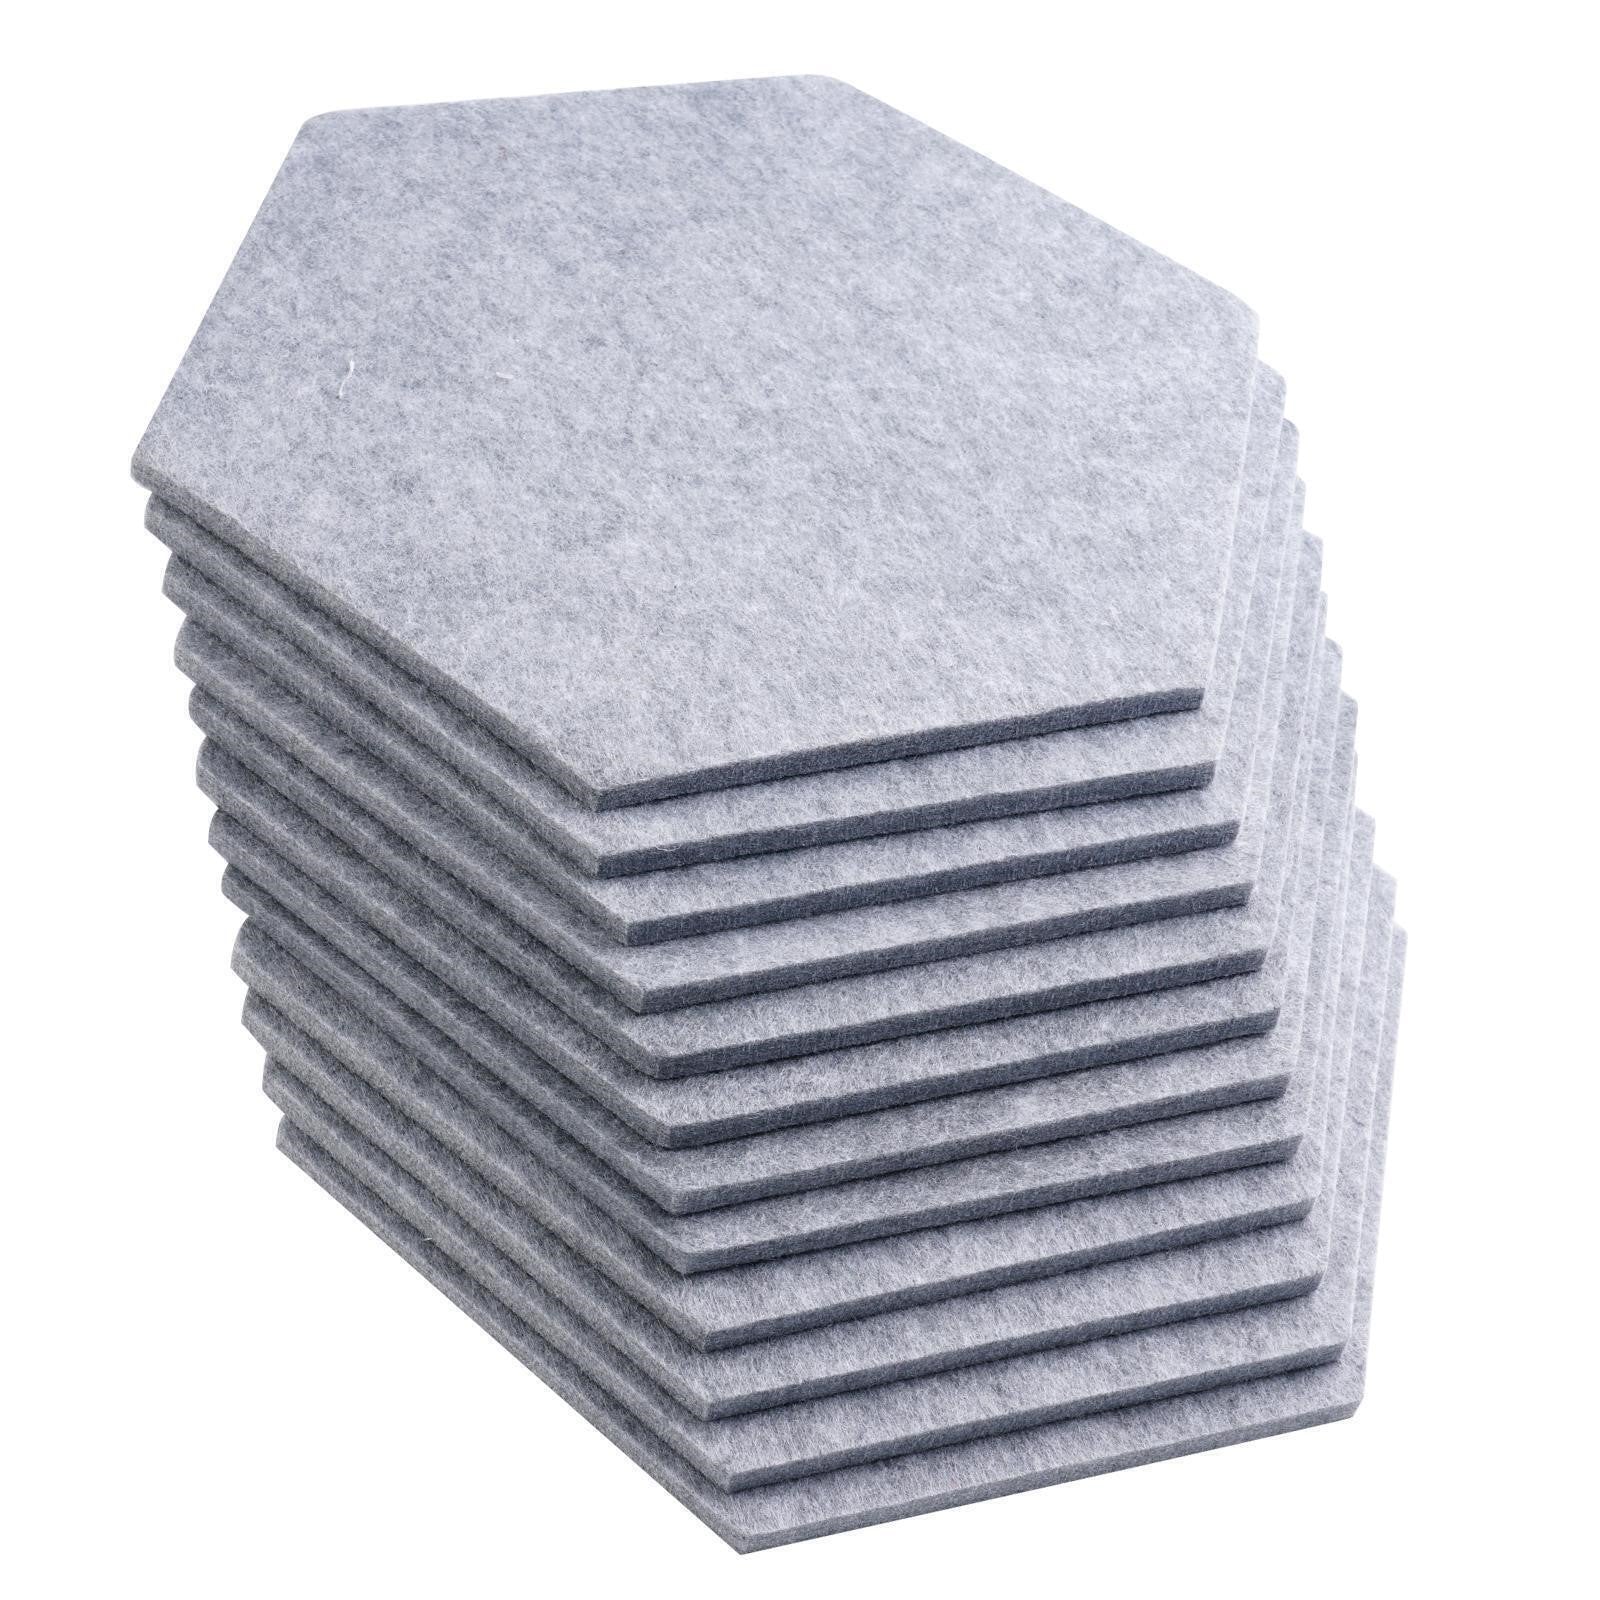 24pcs Hexagon Acoustic Panels Safe Acoustic Absorber Sound Absorbing Foam Panel - Office Catch